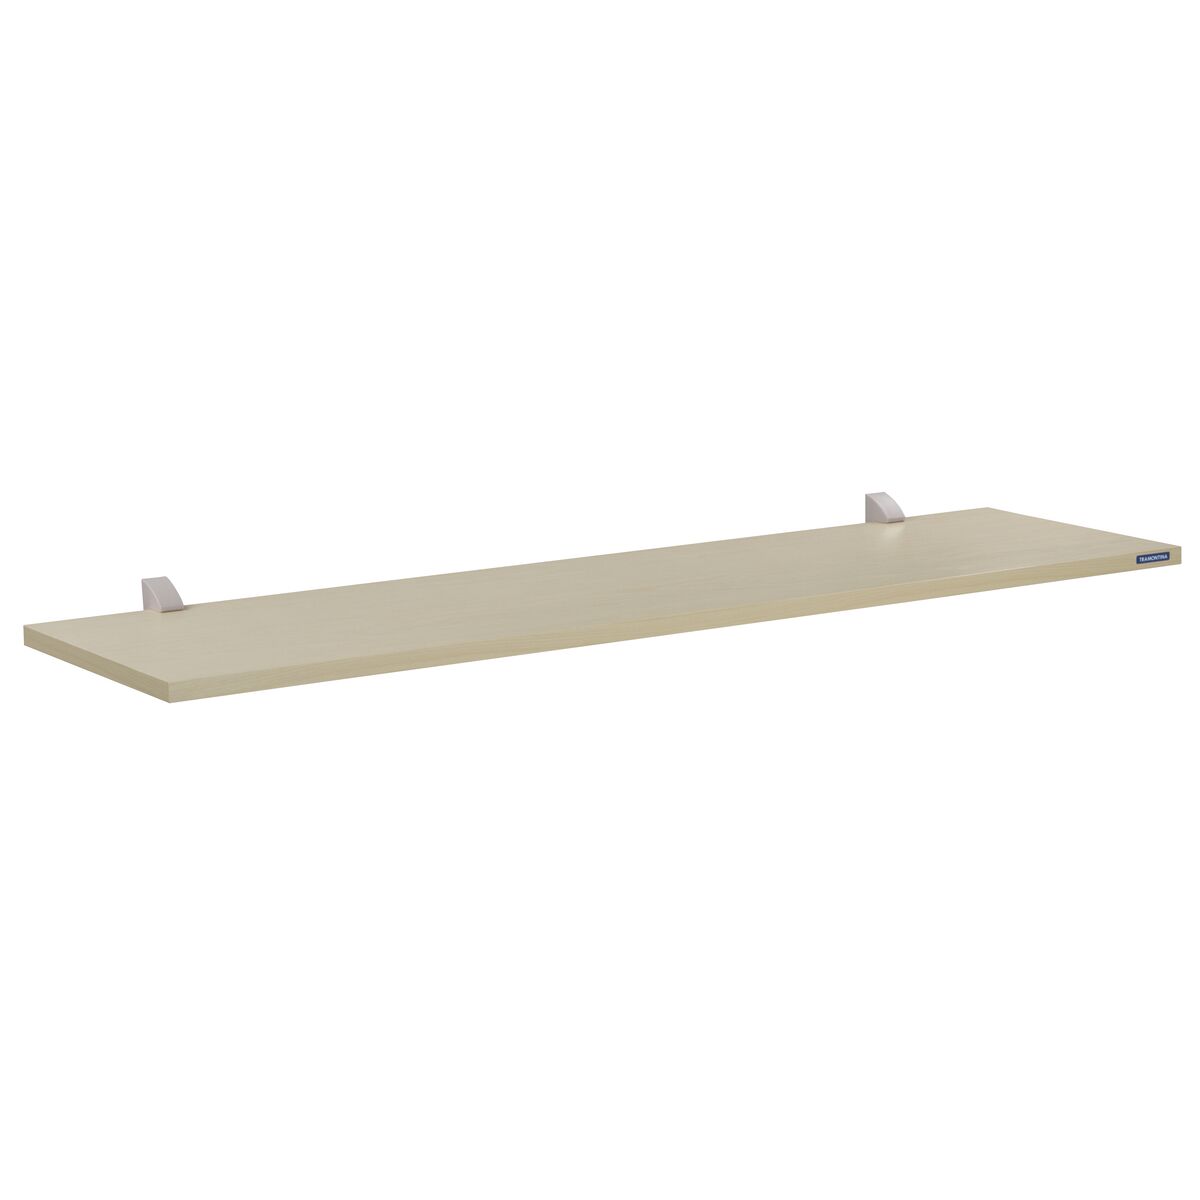 
Tramontina Elite Pine Wood Shelf with a Maple-colored Finish and Injected Support 400 x 250 x 15 mm

